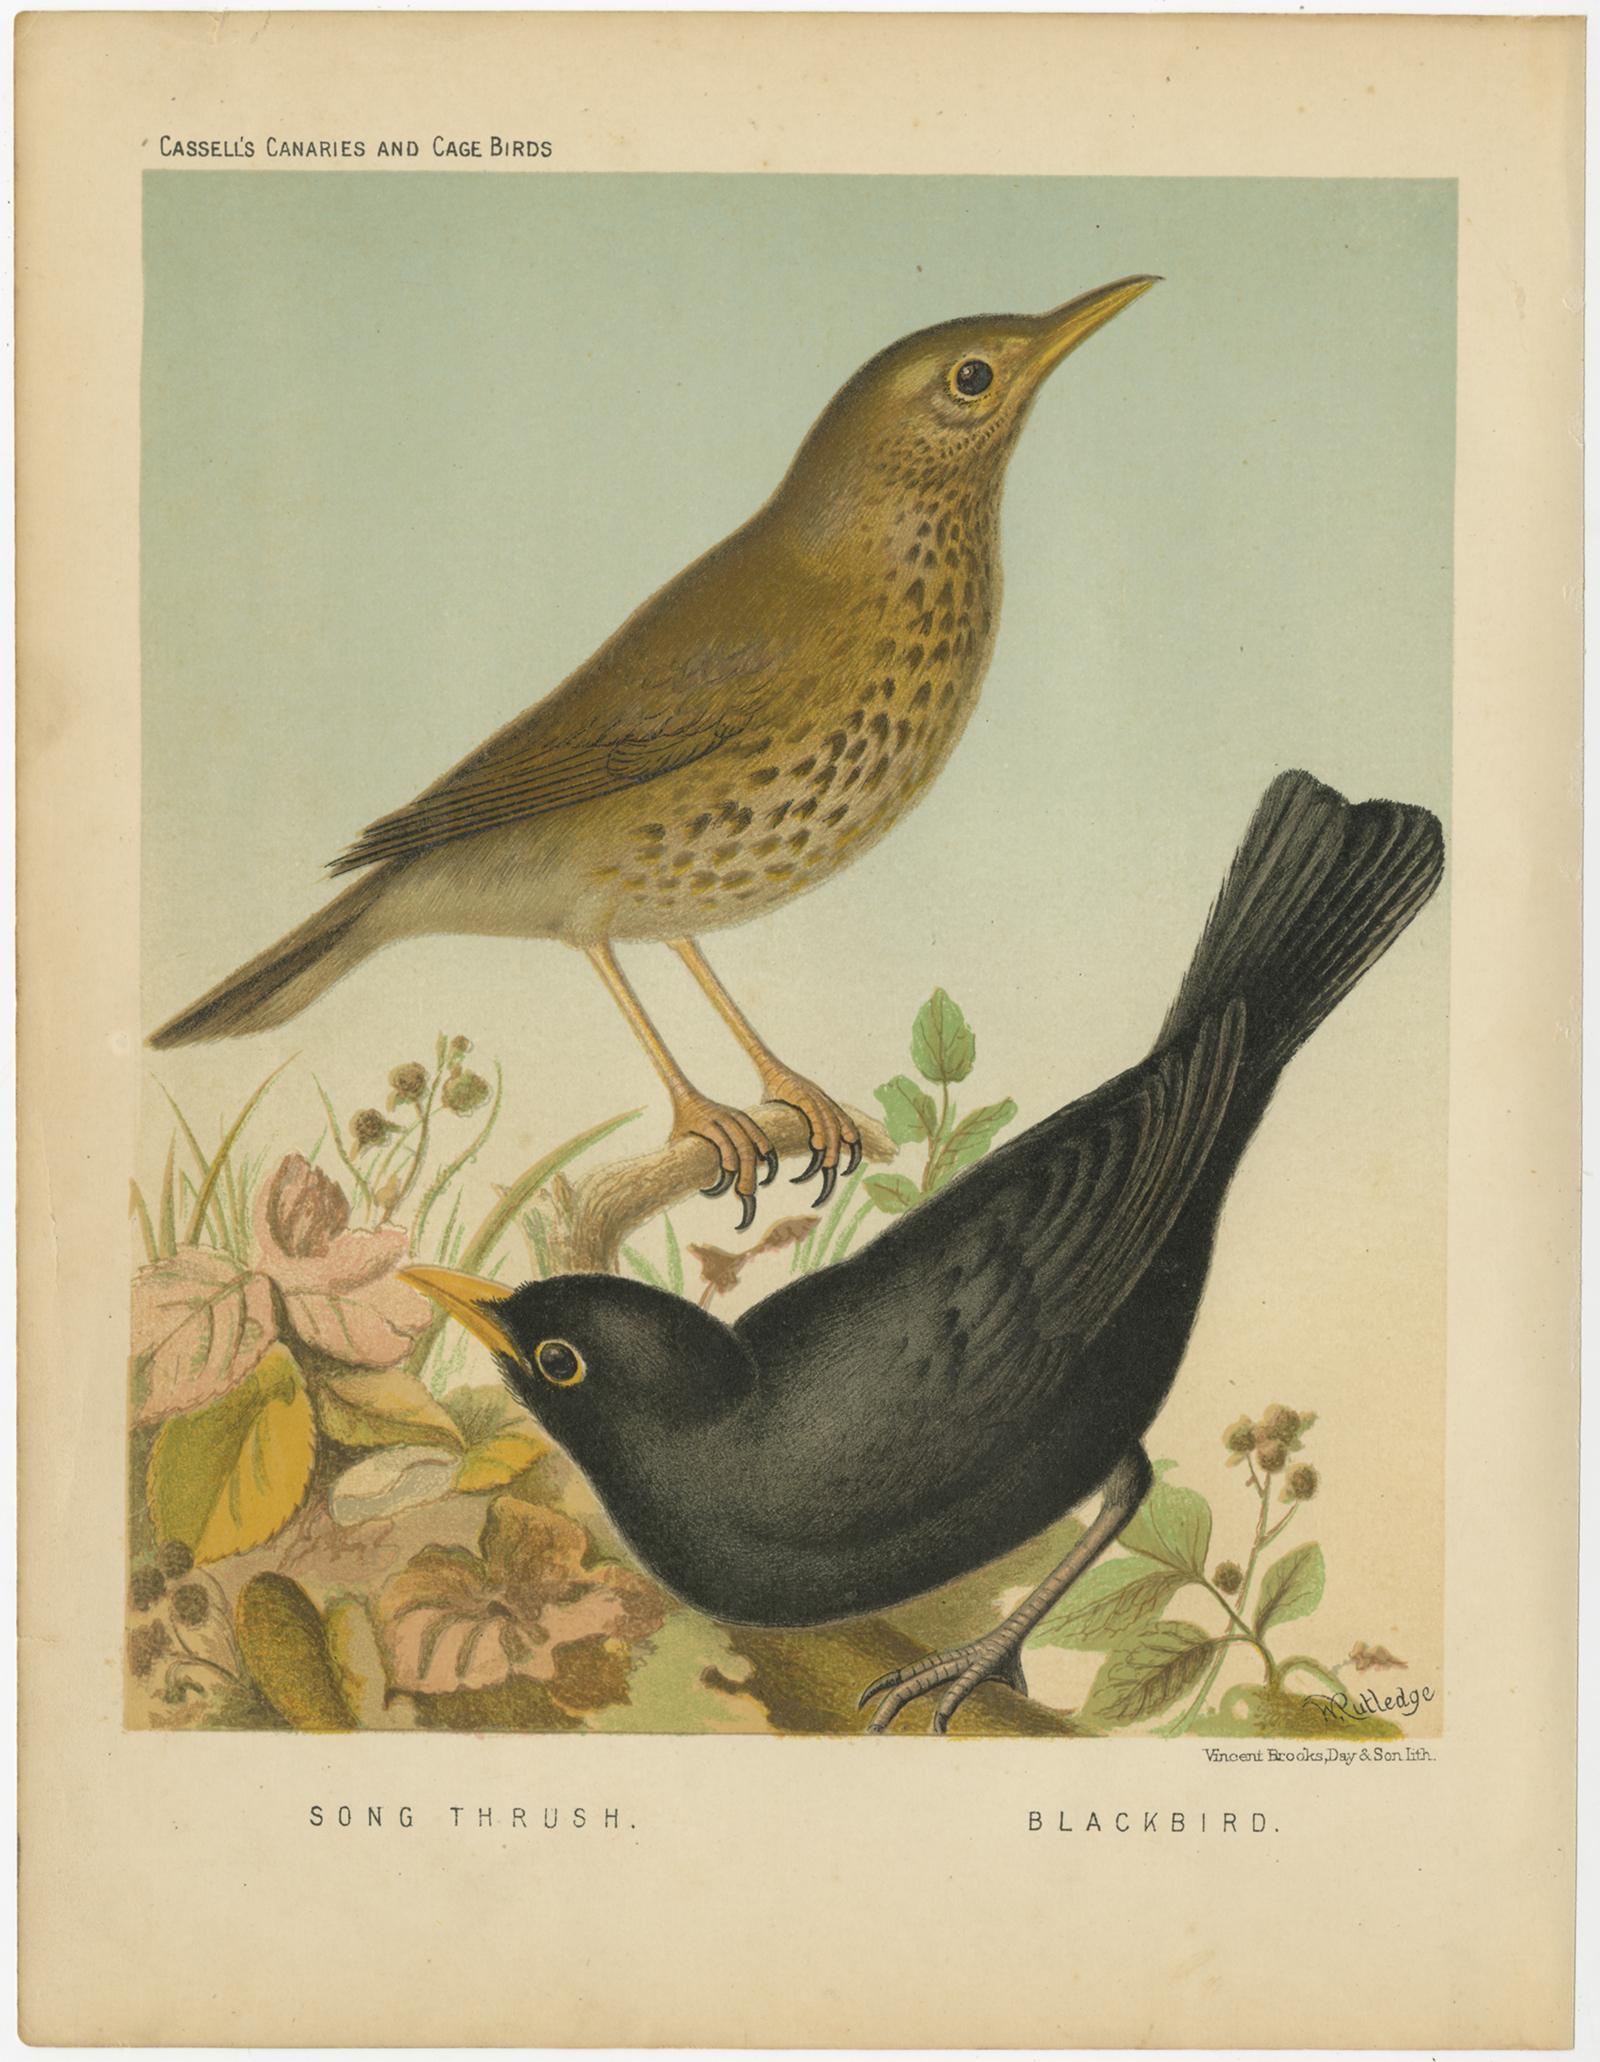 Antique bird print titled '1. Song Thrush 2. Blackbird' Old bird print depicting the Song Thrush and the Blackbird. This print originates from: 'Illustrated book of canaries and cage-birds' by W. A. Blackston, W. Swaysland and August F. Wiener